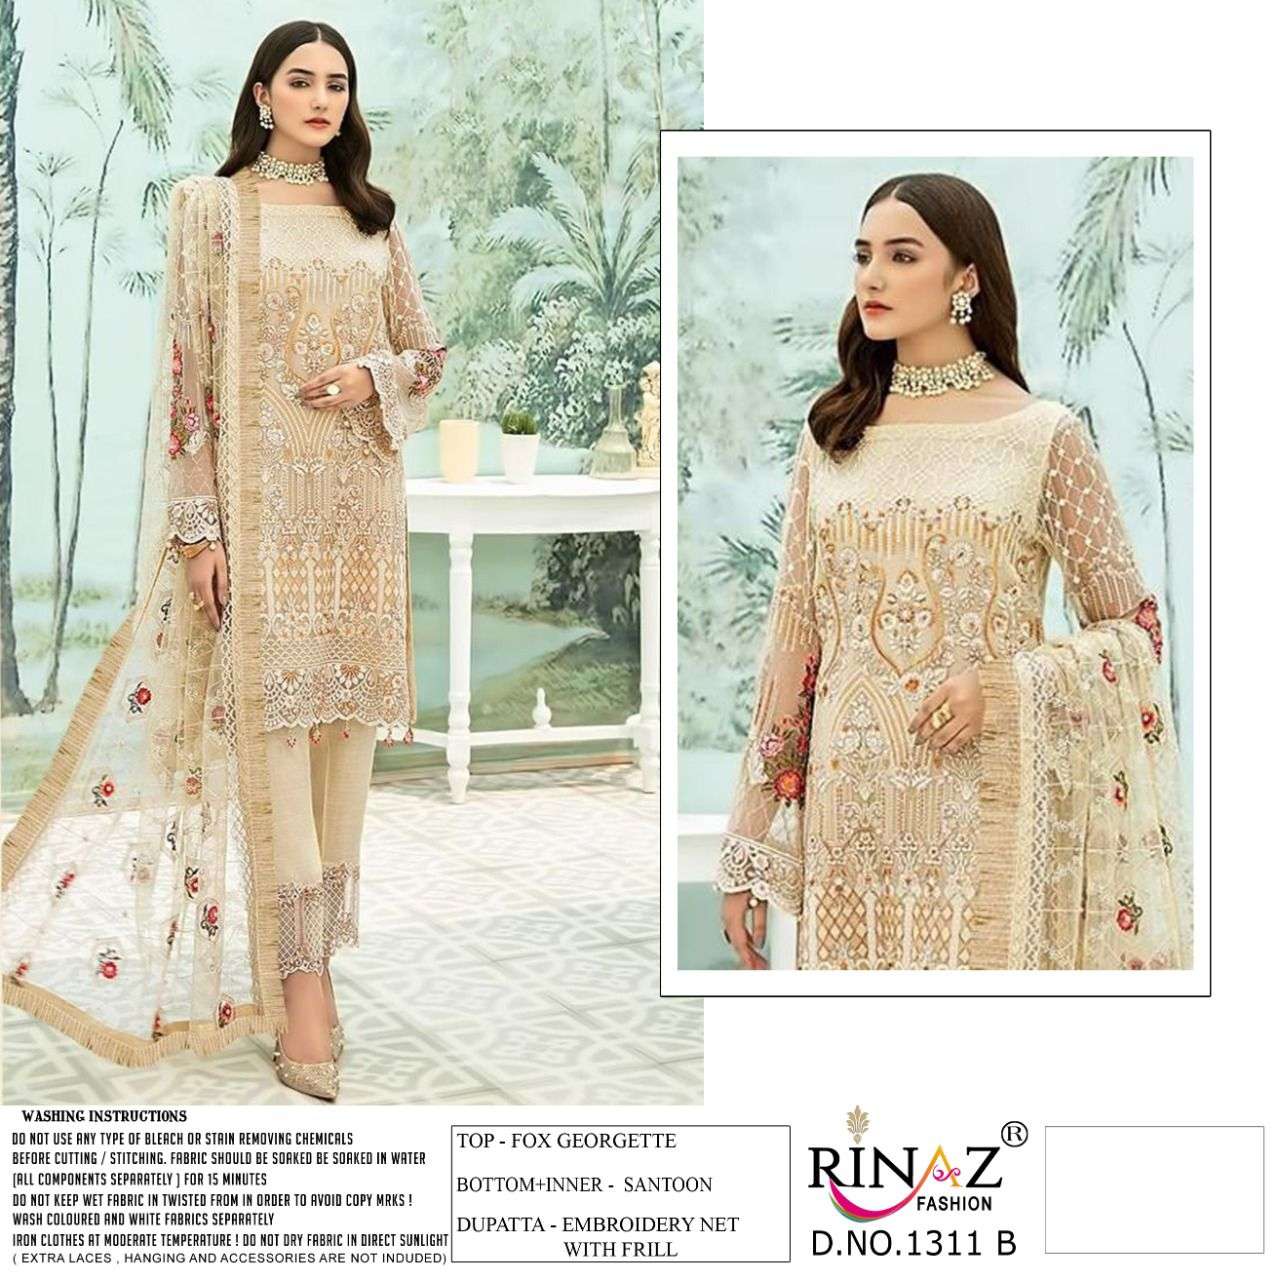 Rinaz Fashion Present Rinaz D.no 1311 A To 1311 D Series Georgette Pakistani Salwar Suits In Wholesale Price At Saidharanx